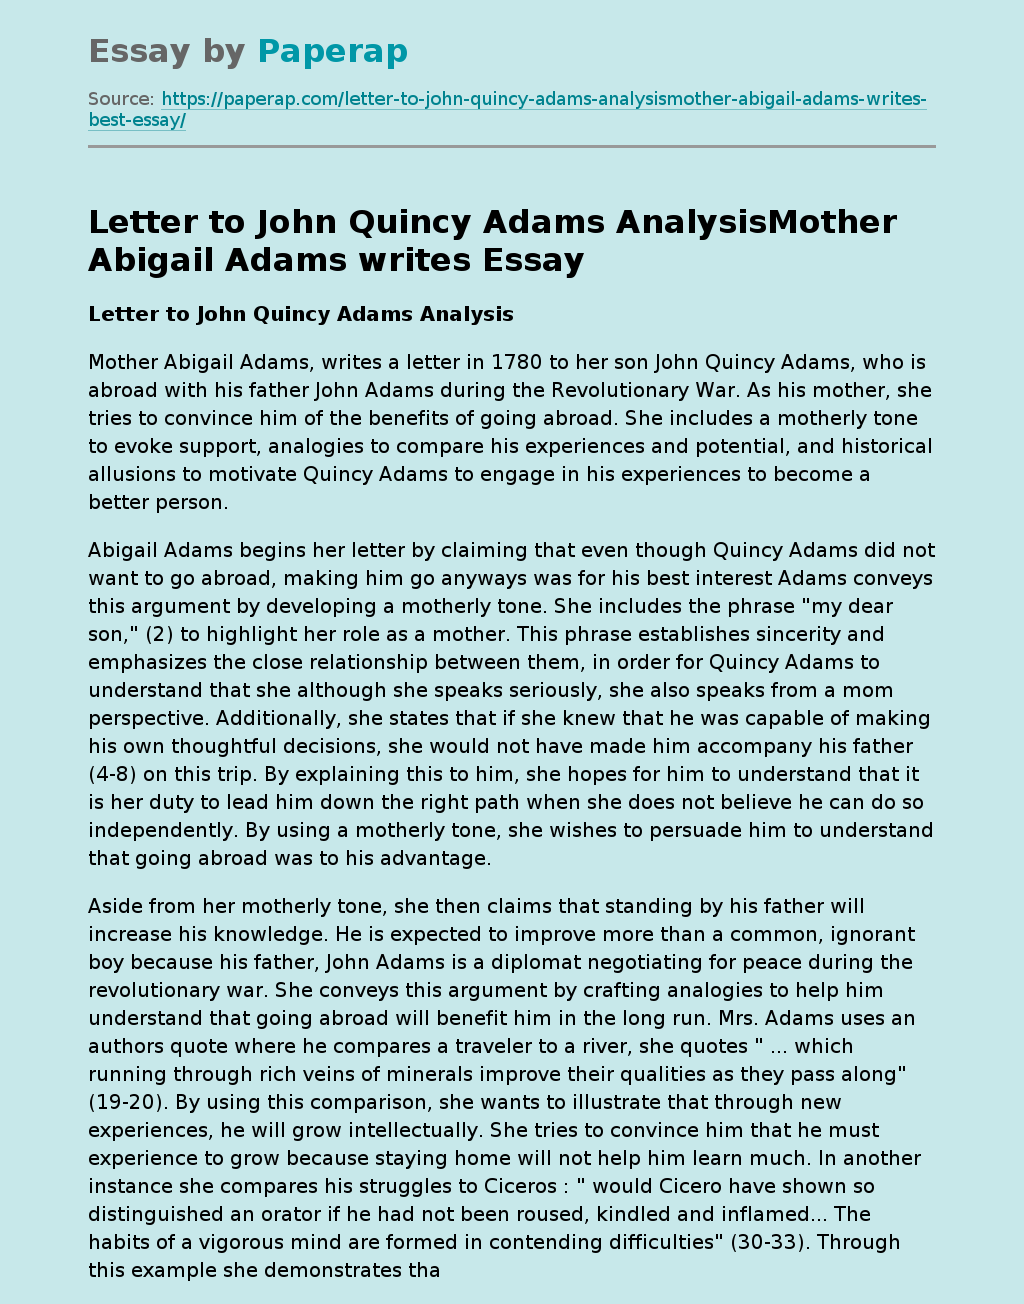 Letter to John Quincy Adams AnalysisMother Abigail Adams writes